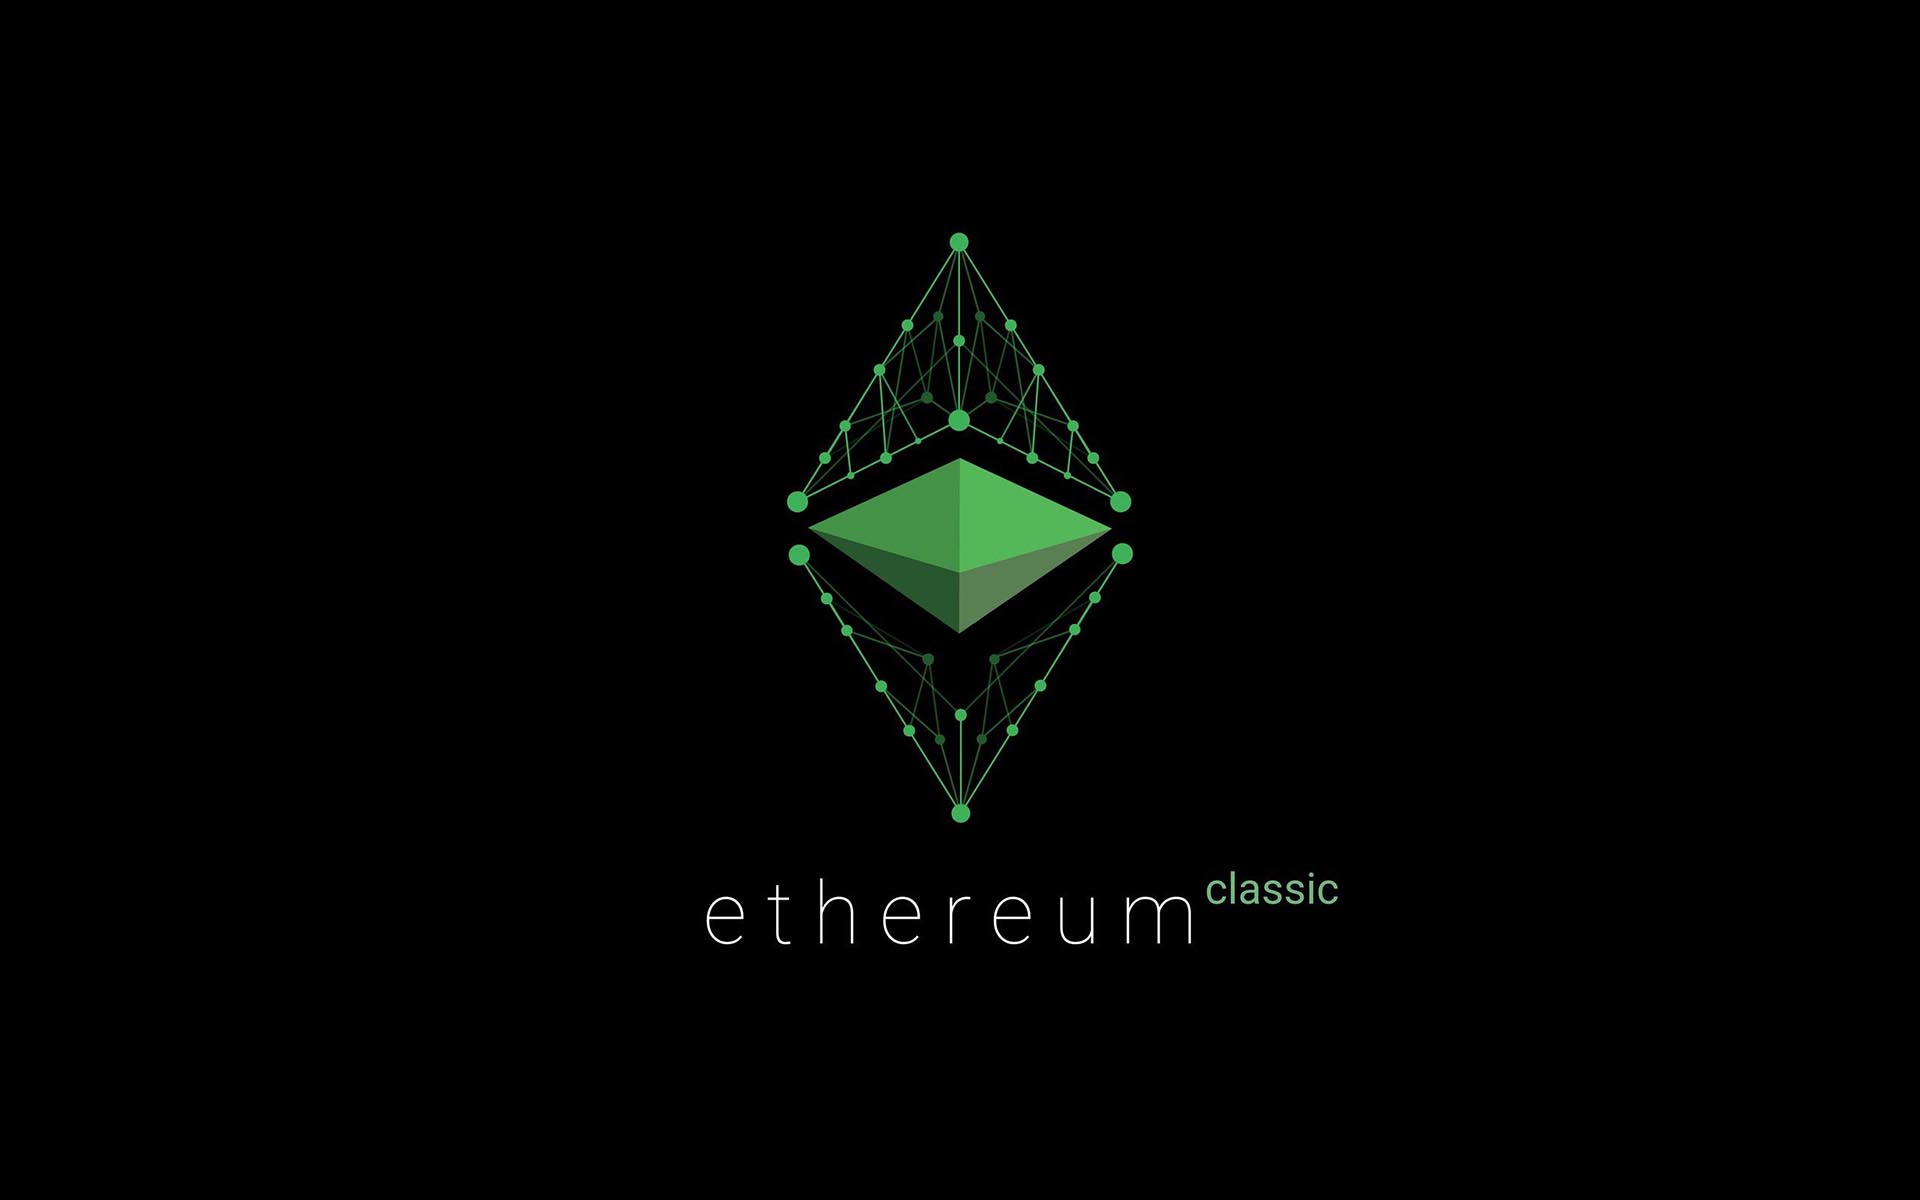 Ethereum Classic as an alternative to Ethereum